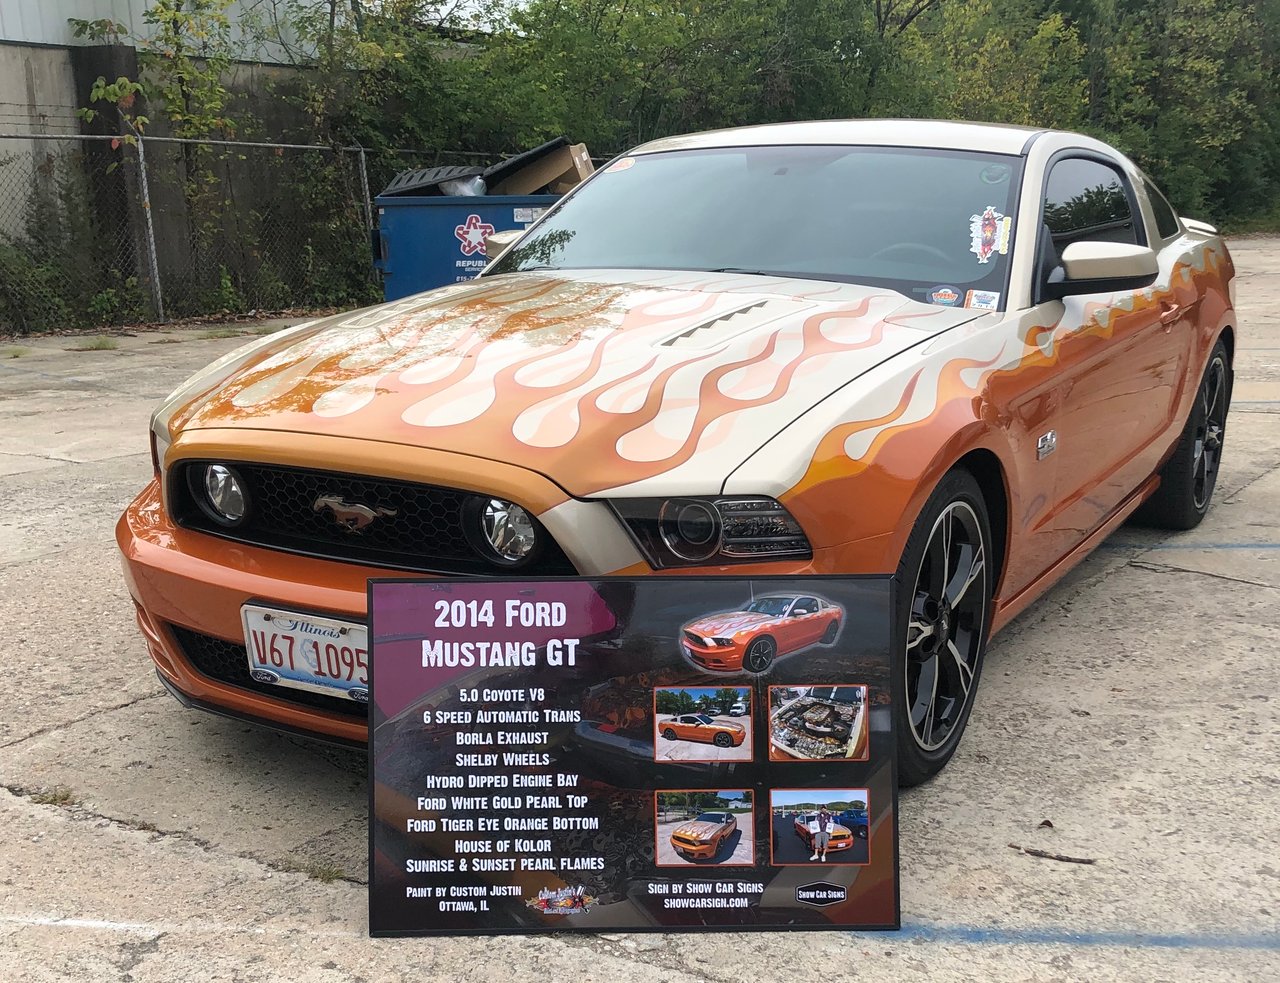 Car Show Board for a Ford Mustang GT